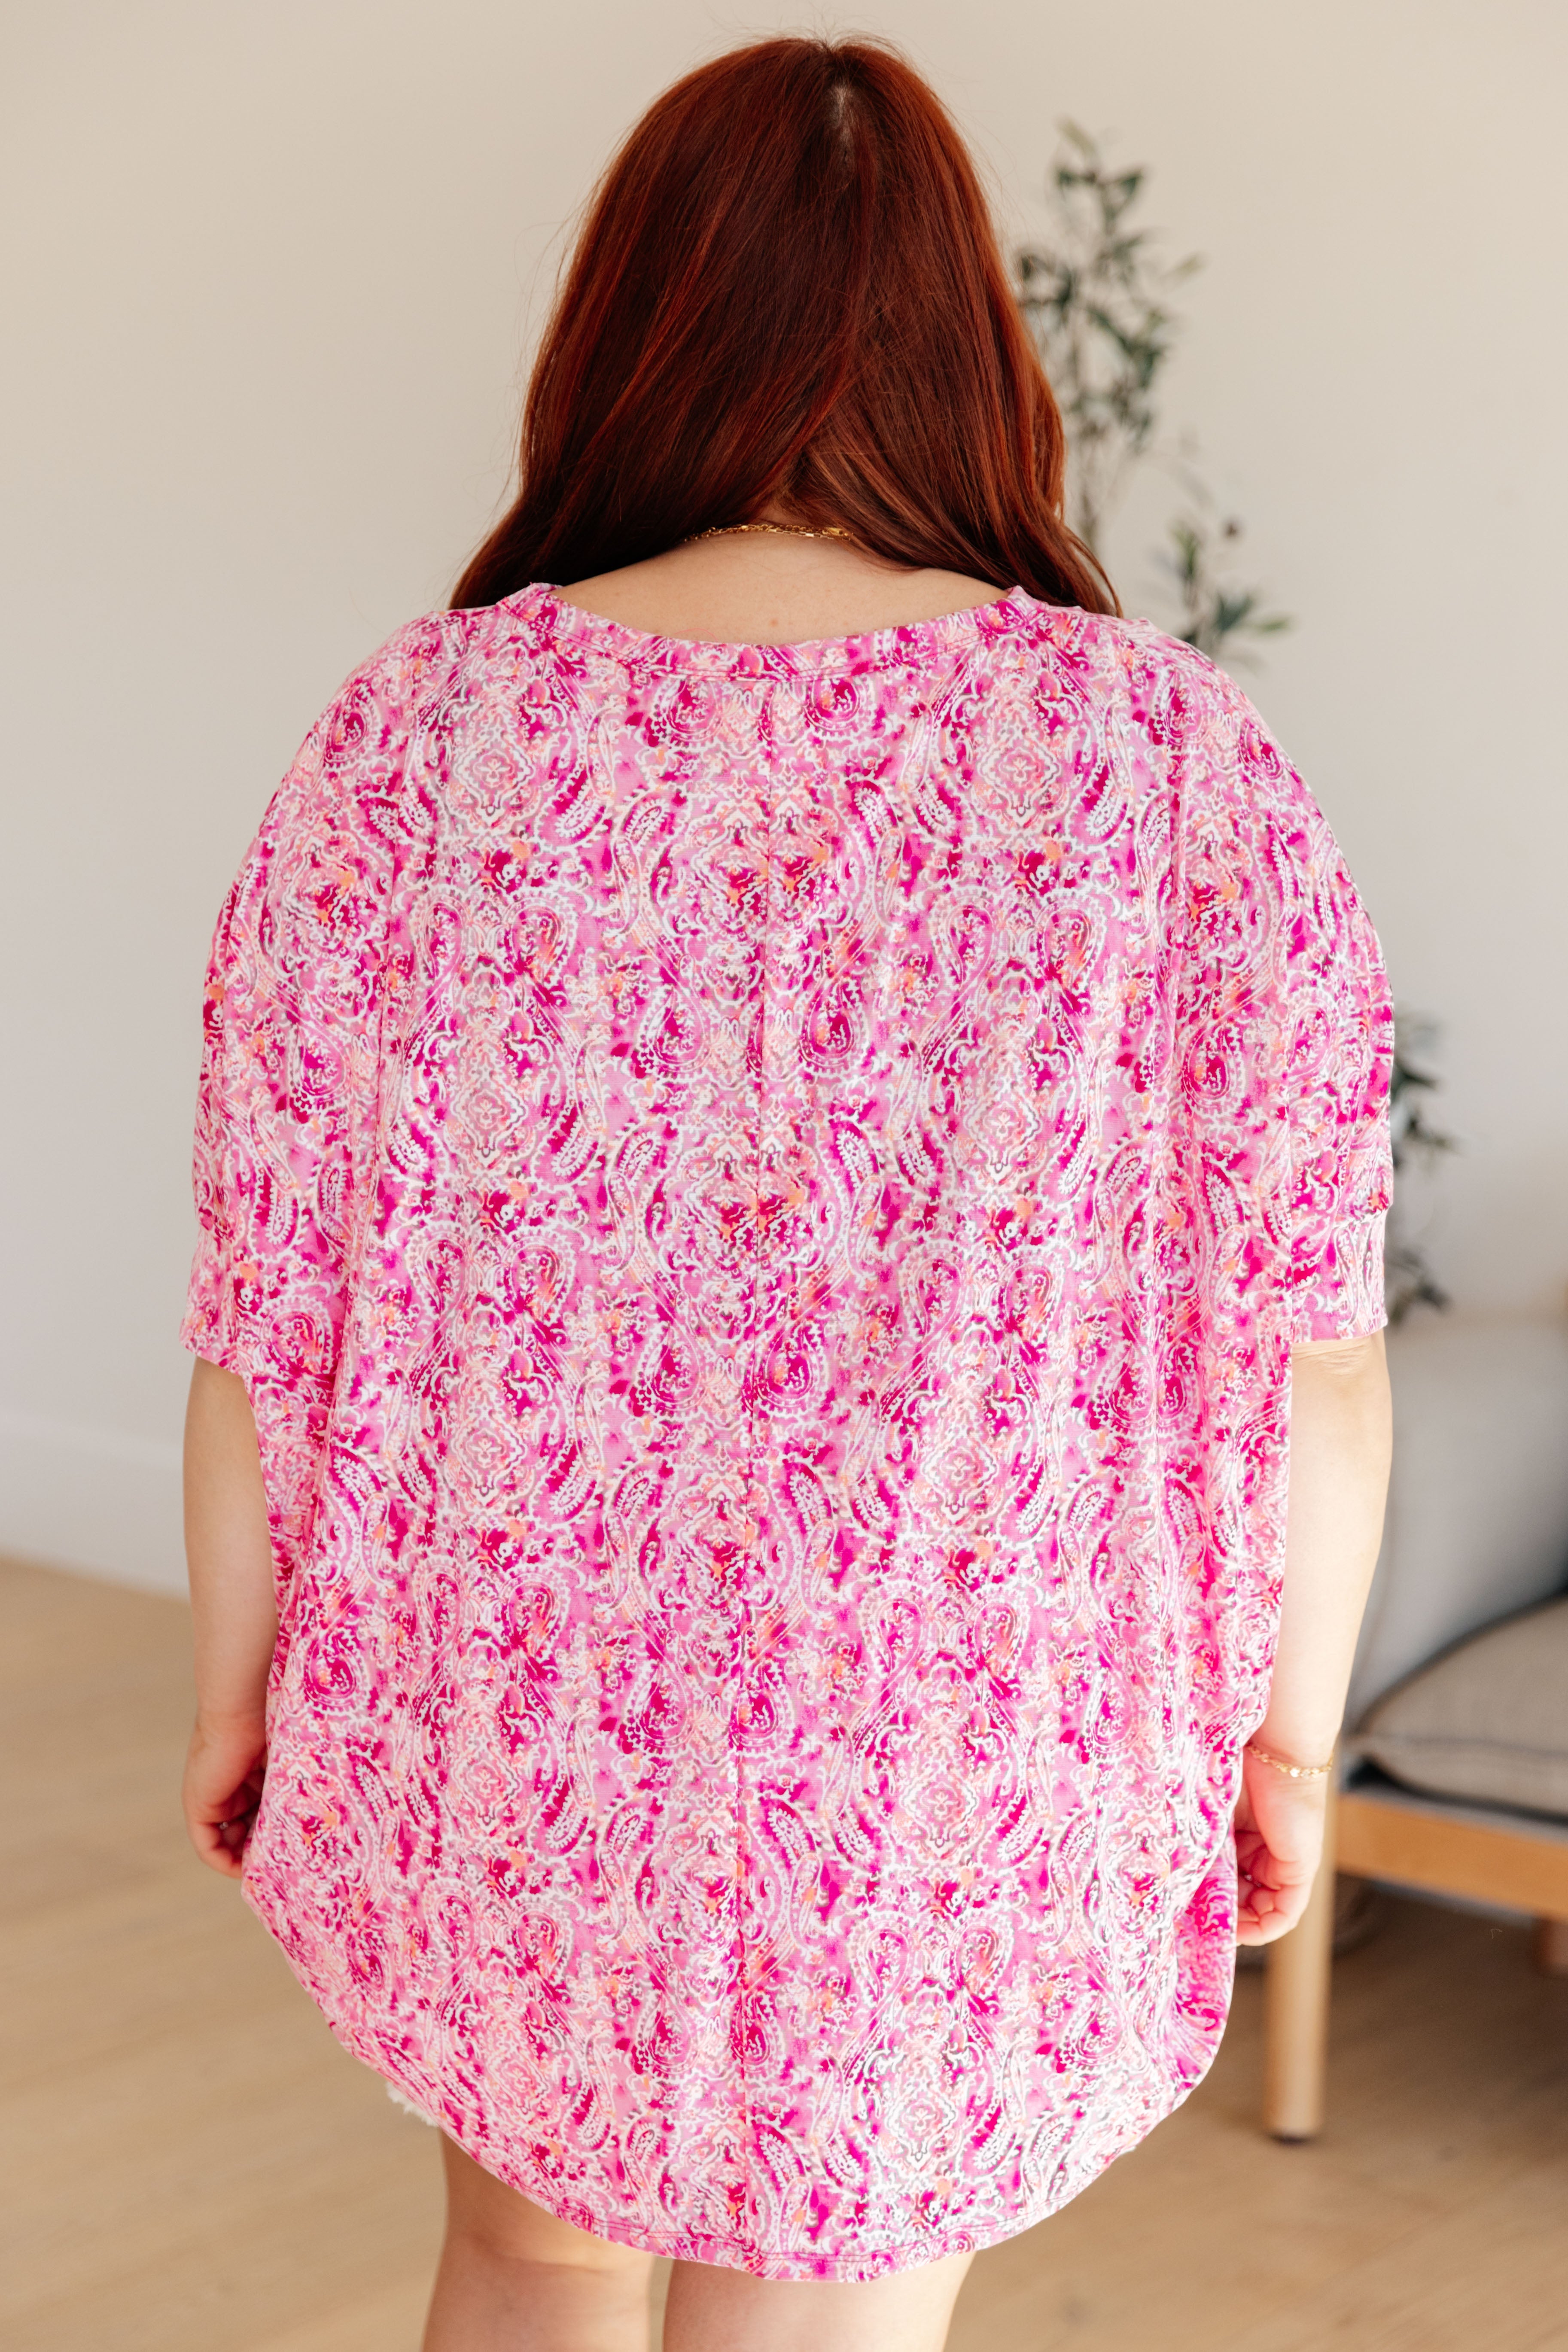 Dear Scarlett Essential Blouse in Fuchsia and White Paisley Final Sale Monday Markdown 06-10